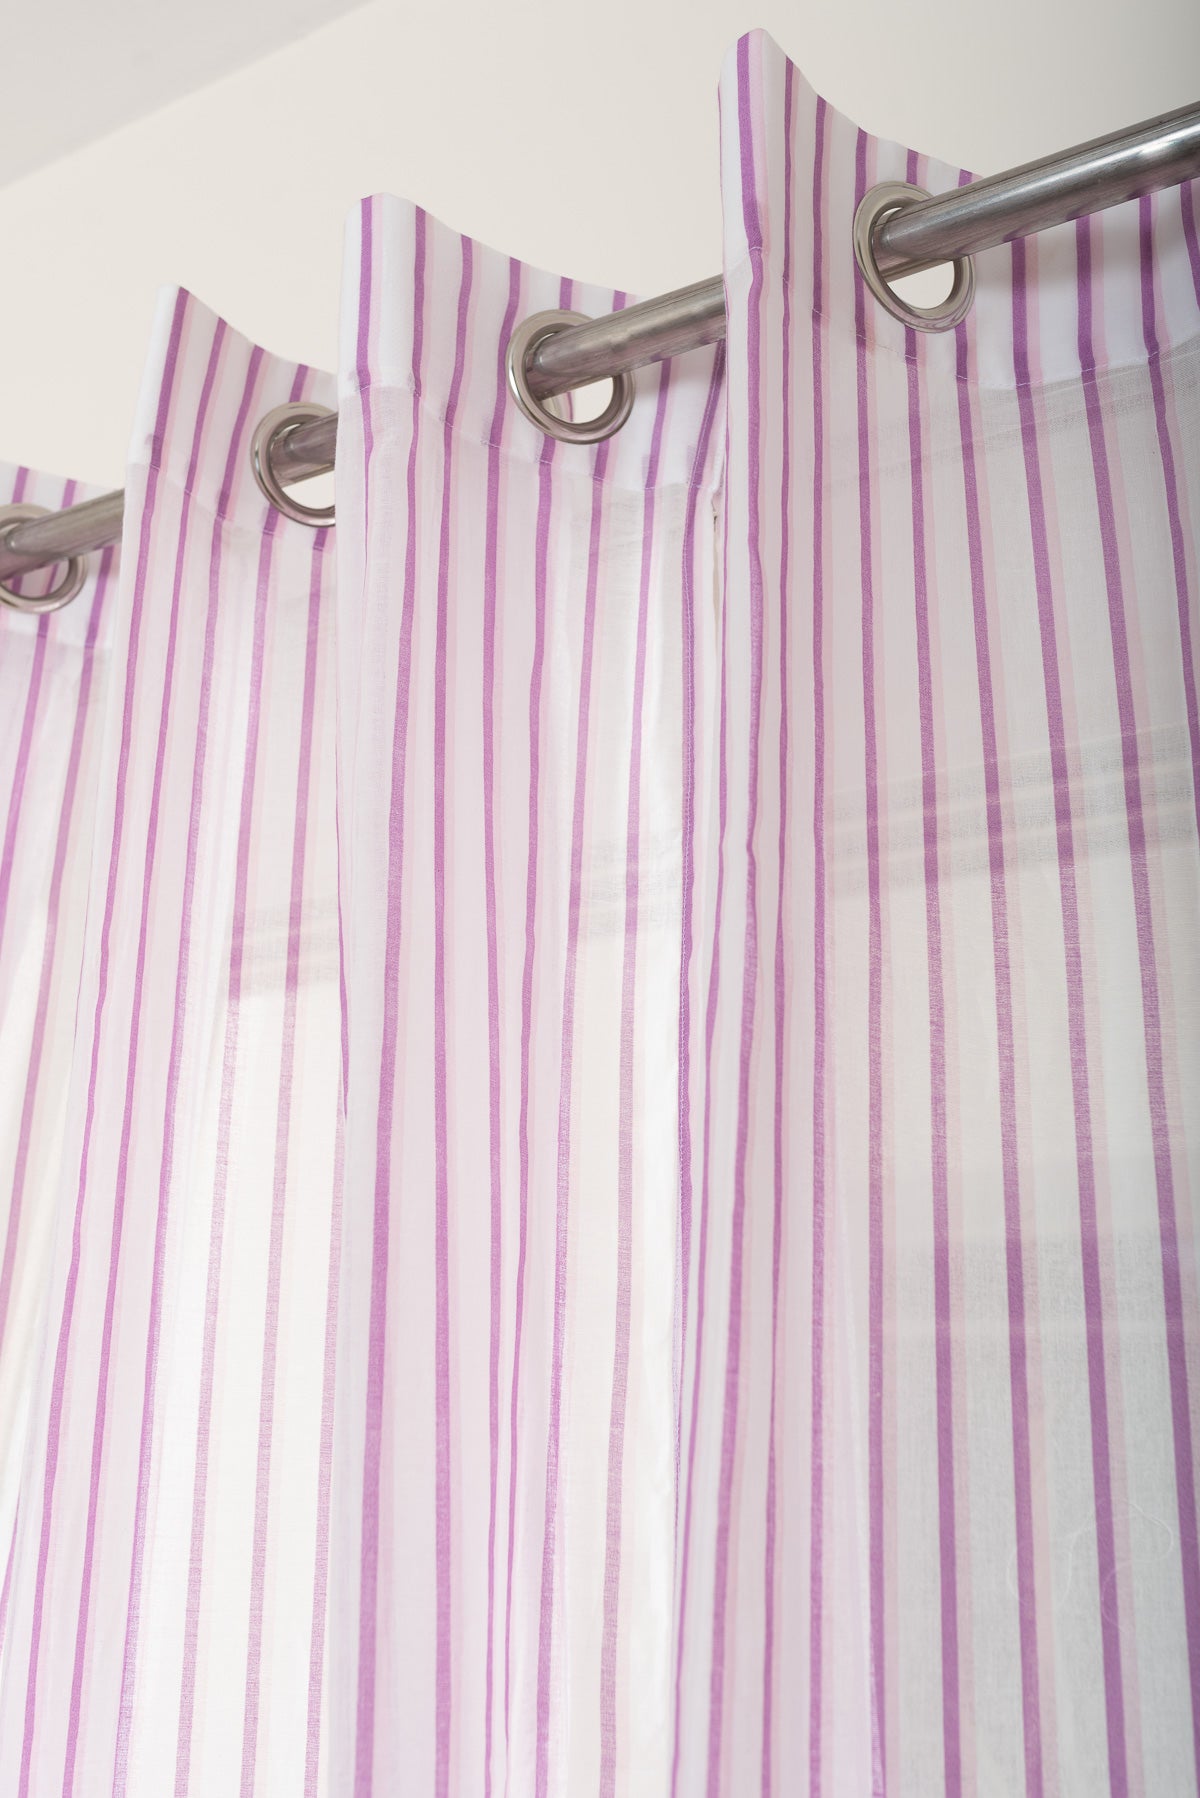 Shadow Stripes in Lavender Cotton Sheer Curtain  - Single